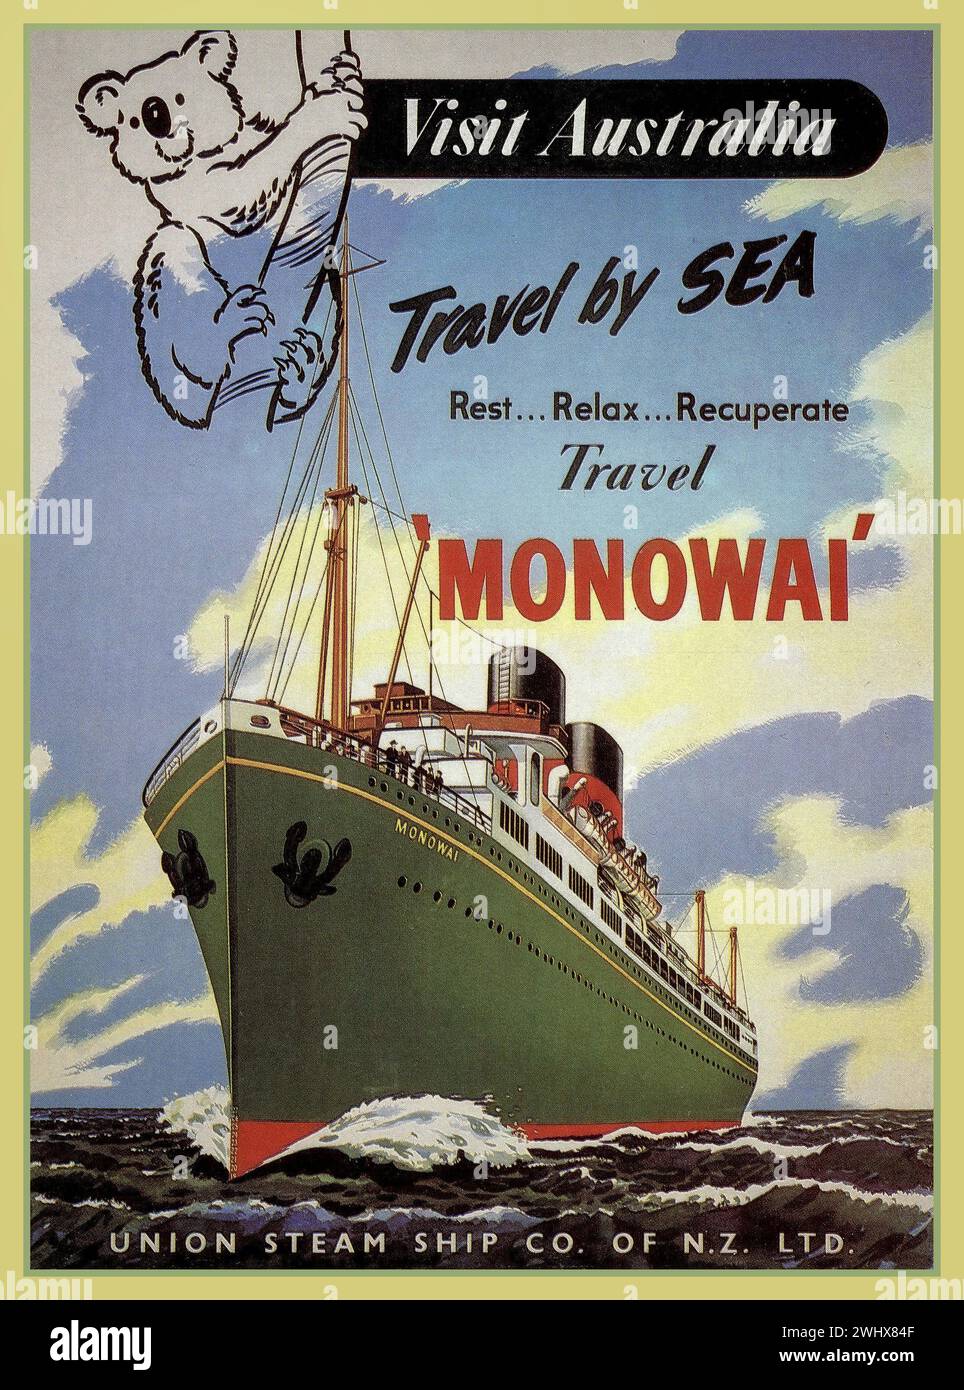 1930s  'VISIT AUSTRALIA' vintage travel poster featuring the two funnel MONOWAI steamship. Travel by Sea, Rest..Relax..Recuperate.. Union Steam Ship Company of NZ Ltd. Stock Photo